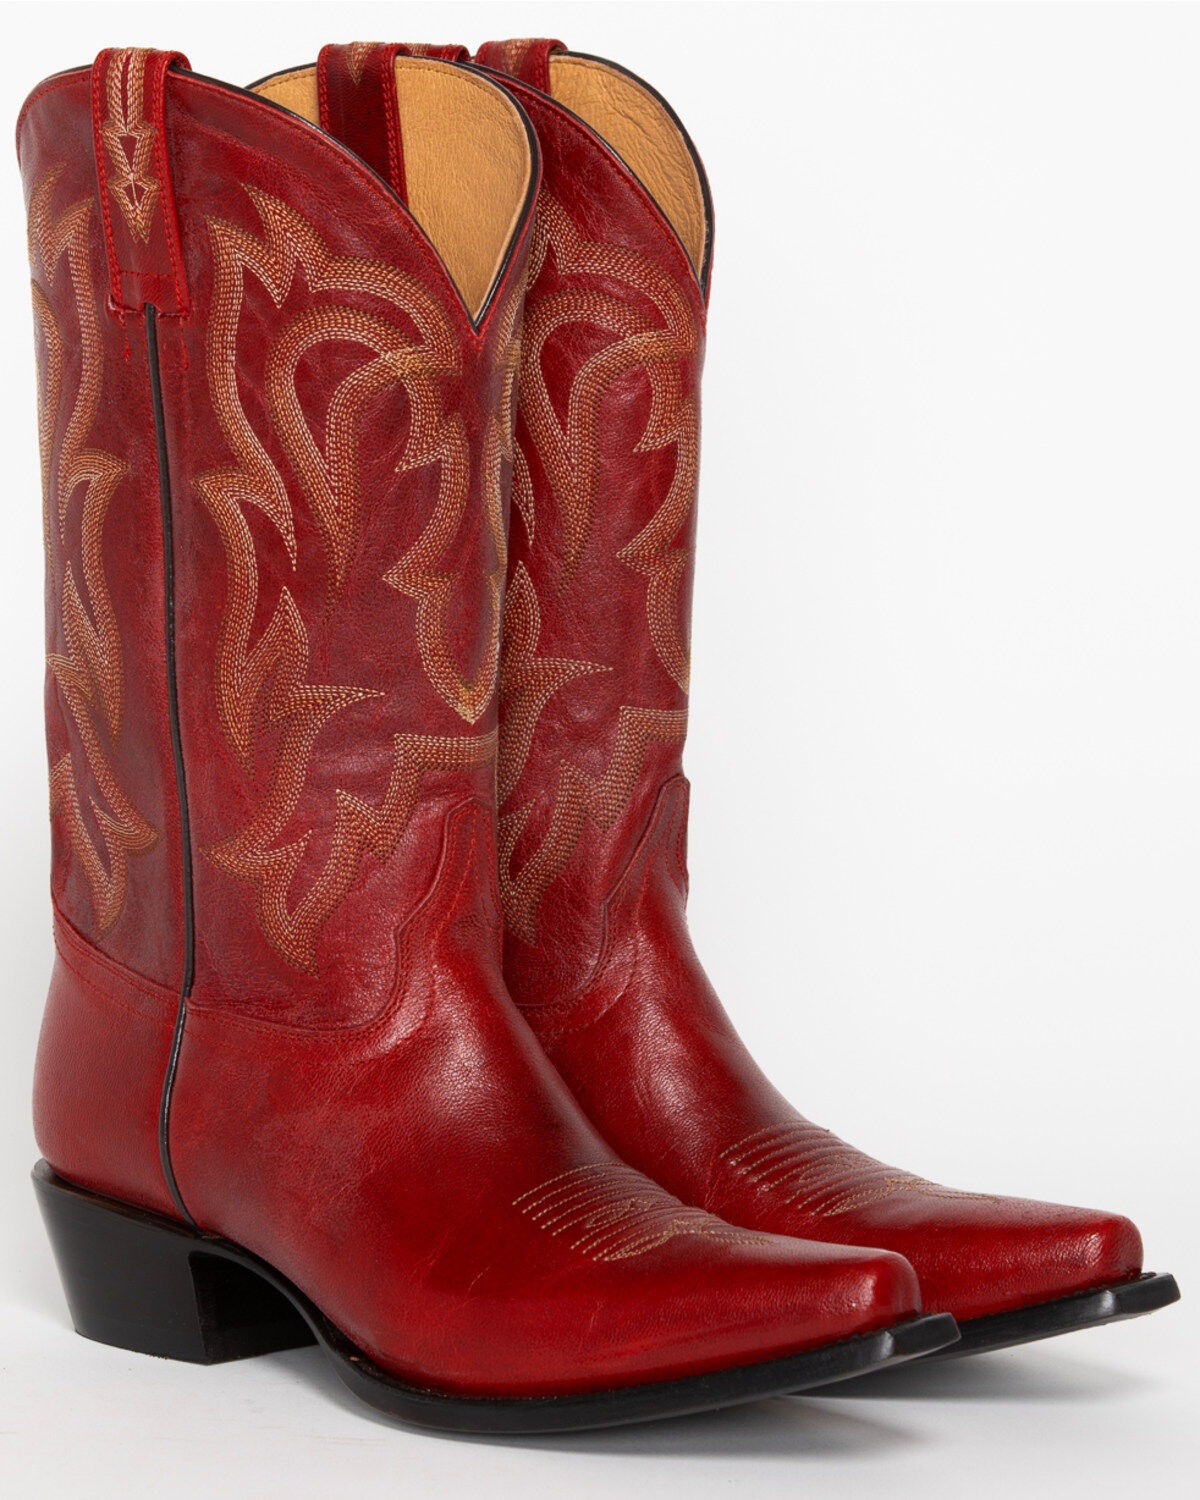 Women's Cowgirl Boots - Boot Barn